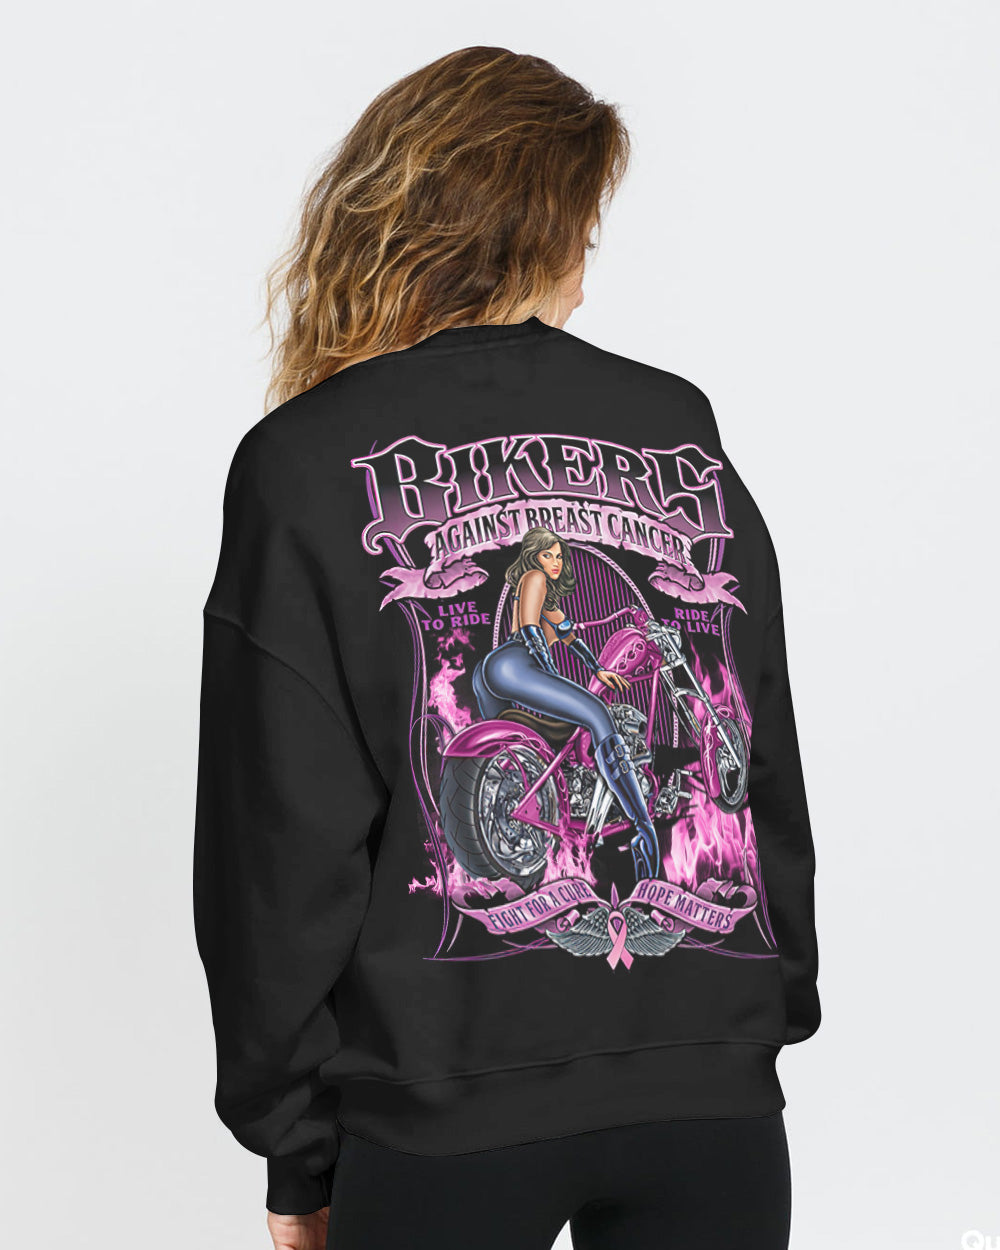 Bikers Fight For A Cure Women's Breast Cancer Awareness Sweatshirt